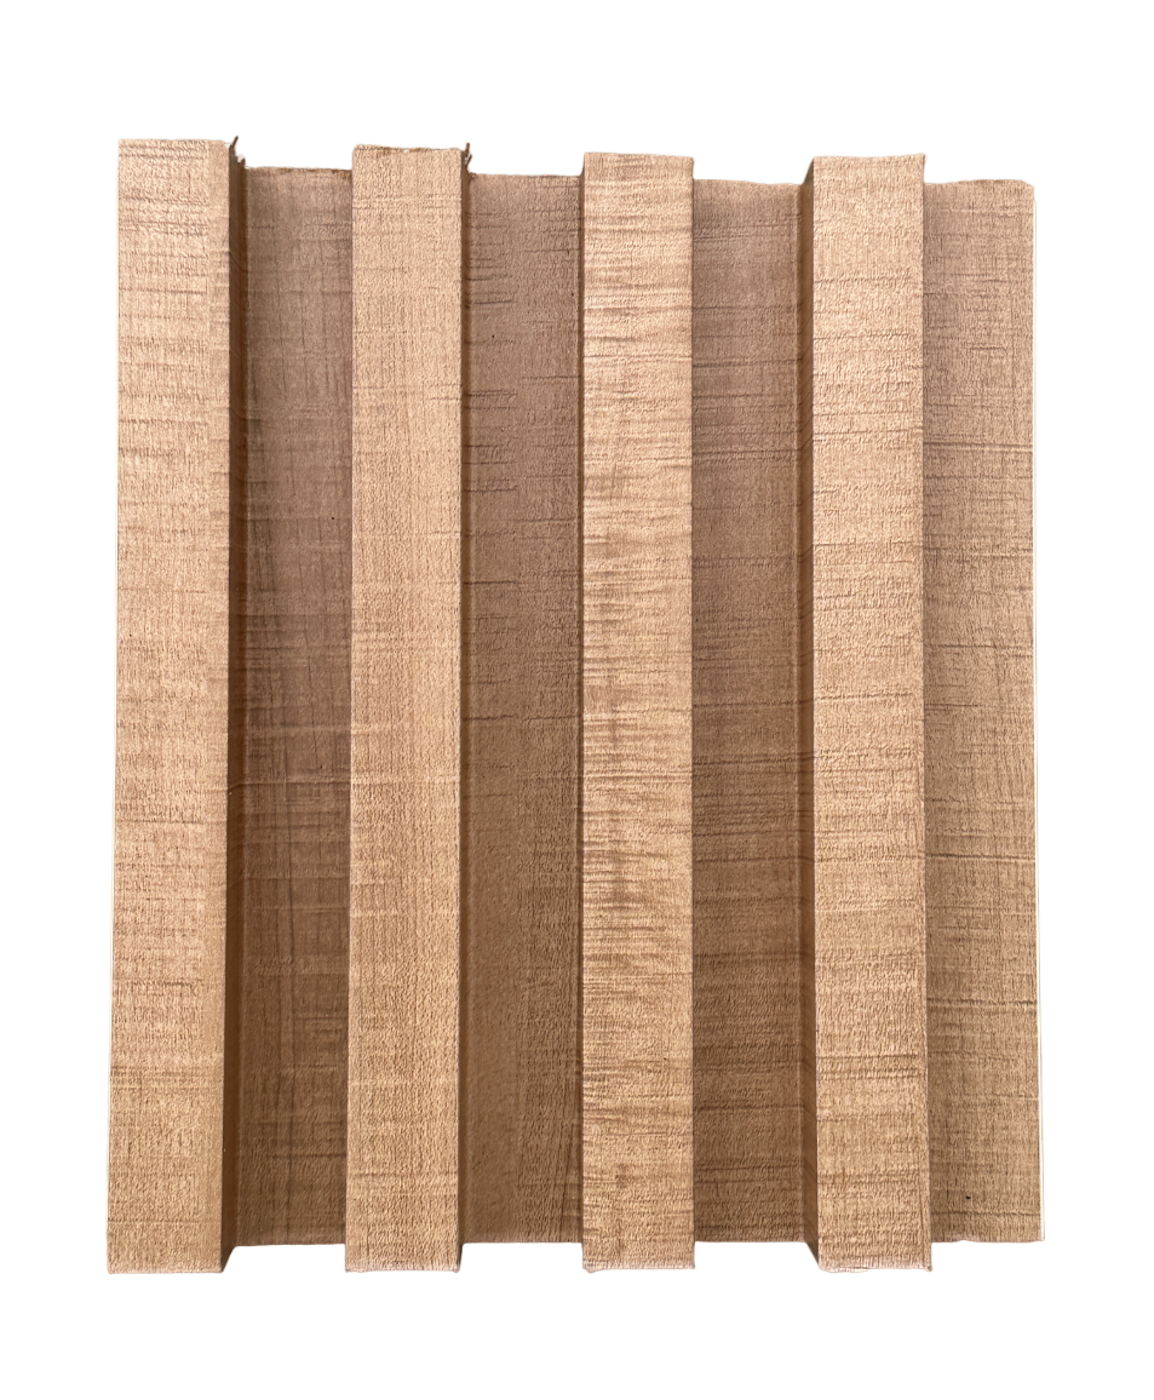 Interior Accent Wall Panels Wood Effect Extra Light Oak Color